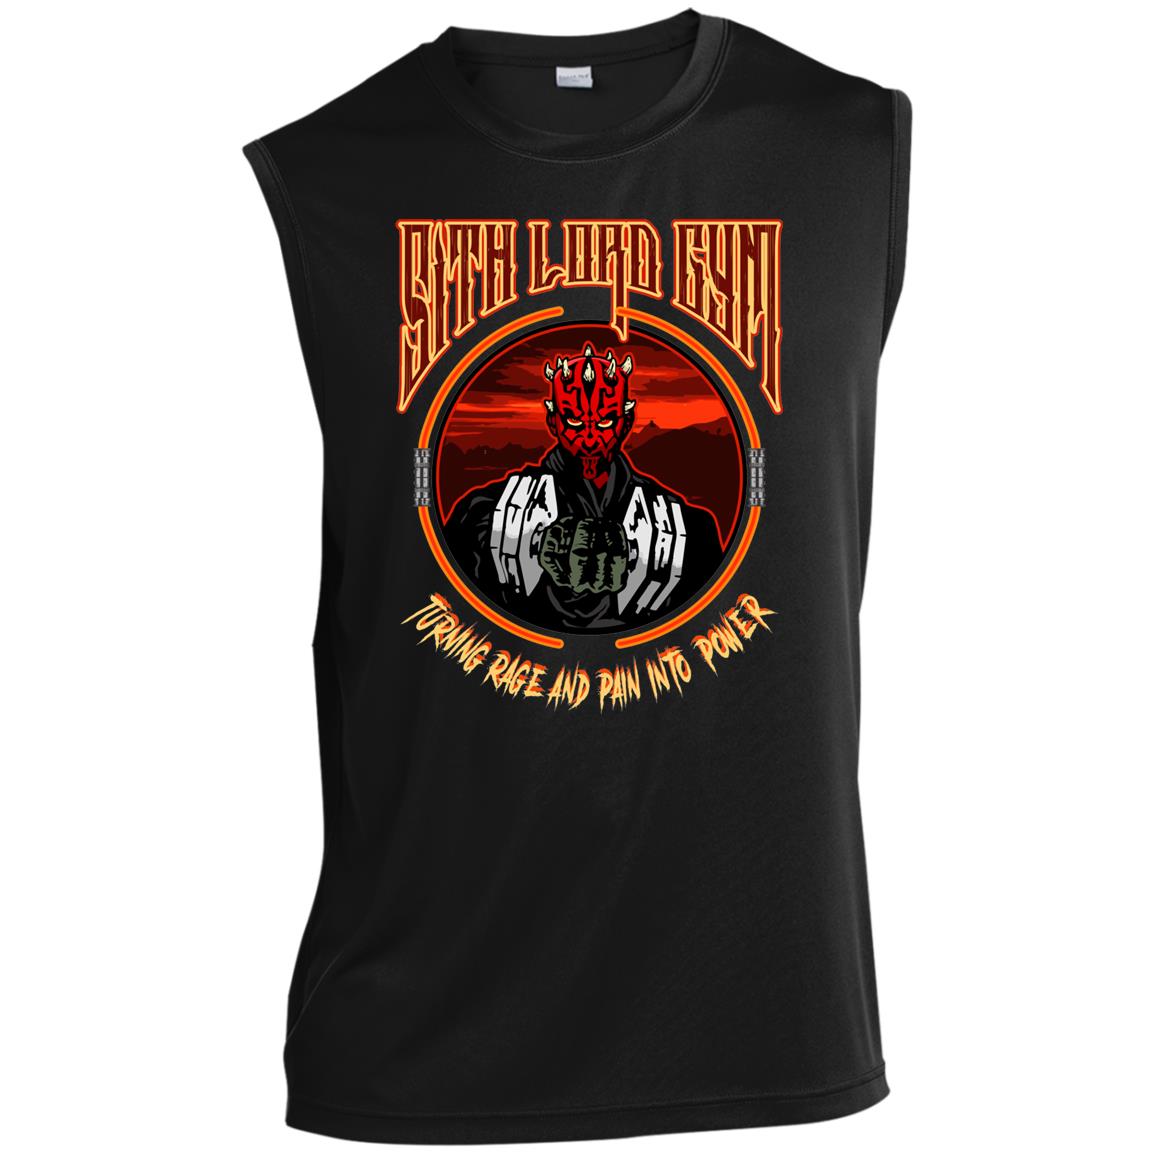 Sith Lord Gym Graphic Tank Top Men’s Sleeveless Performance Tee